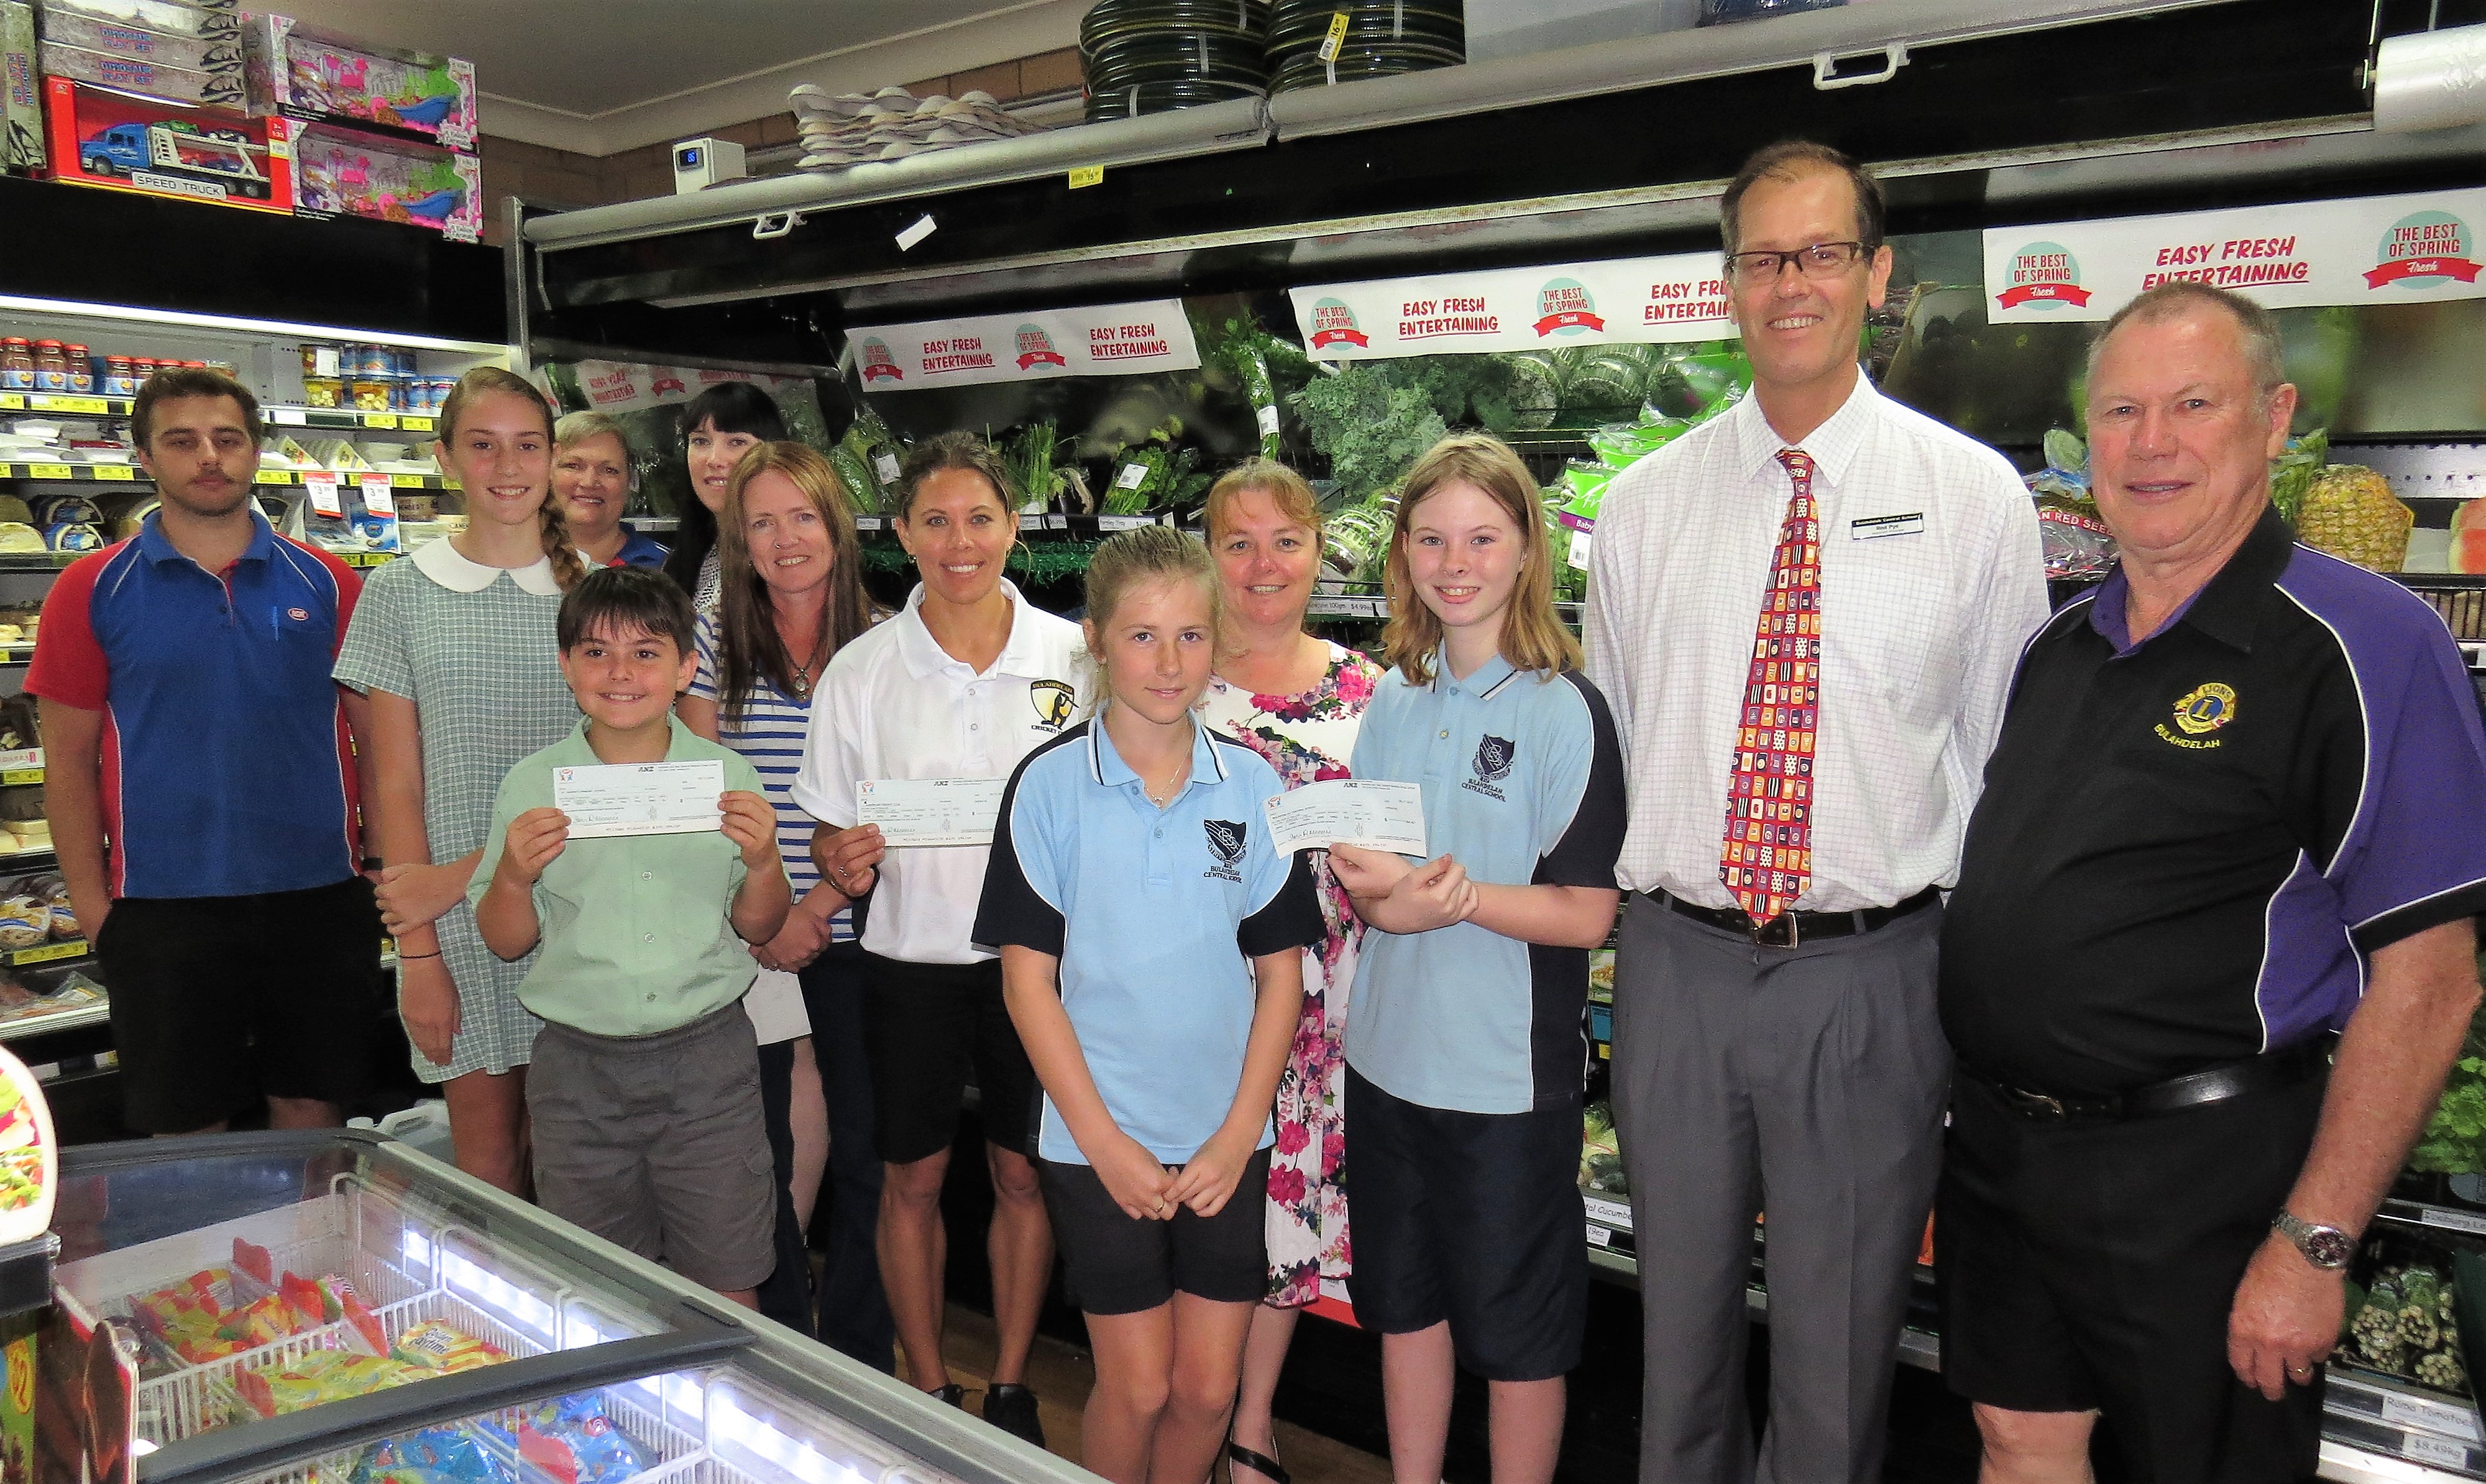 WITH THANKS: IGA’s Tom Weippeart, St Joseph’s students Seren Everingham and Connor Baker, IGA Supervisor Louise Dorney, Teacher Amanda Pomplun, Pony Club’s Alicia Madden, Cricket Club’s Erin Matheson, Olivia Smith, Deb Gilbert, Claire Terry and Rod Pye from BCS and Lions Club President Roger Dixon